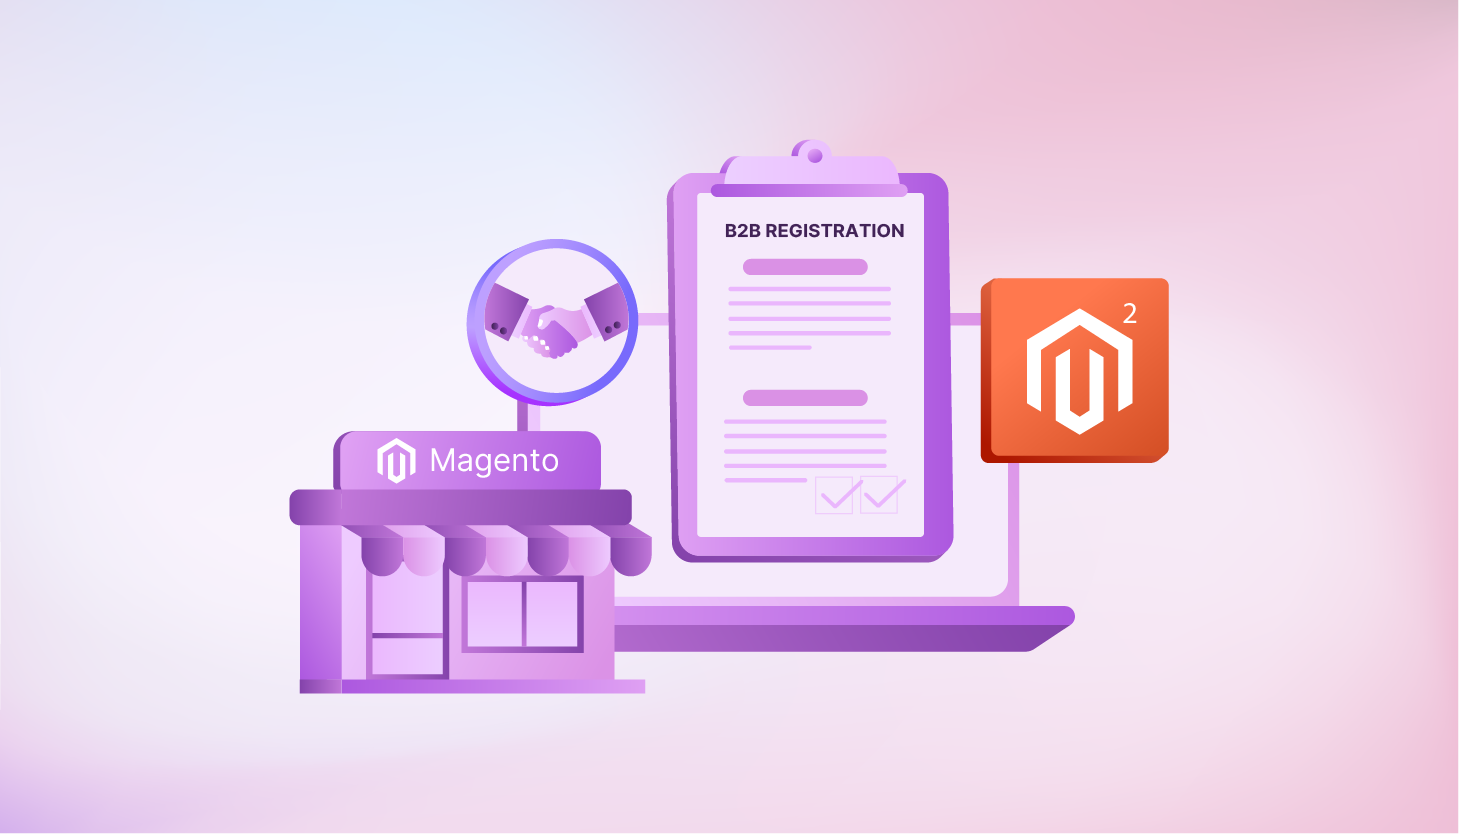 Magento 2 B2B Registration Form: Requirements and Top Providers